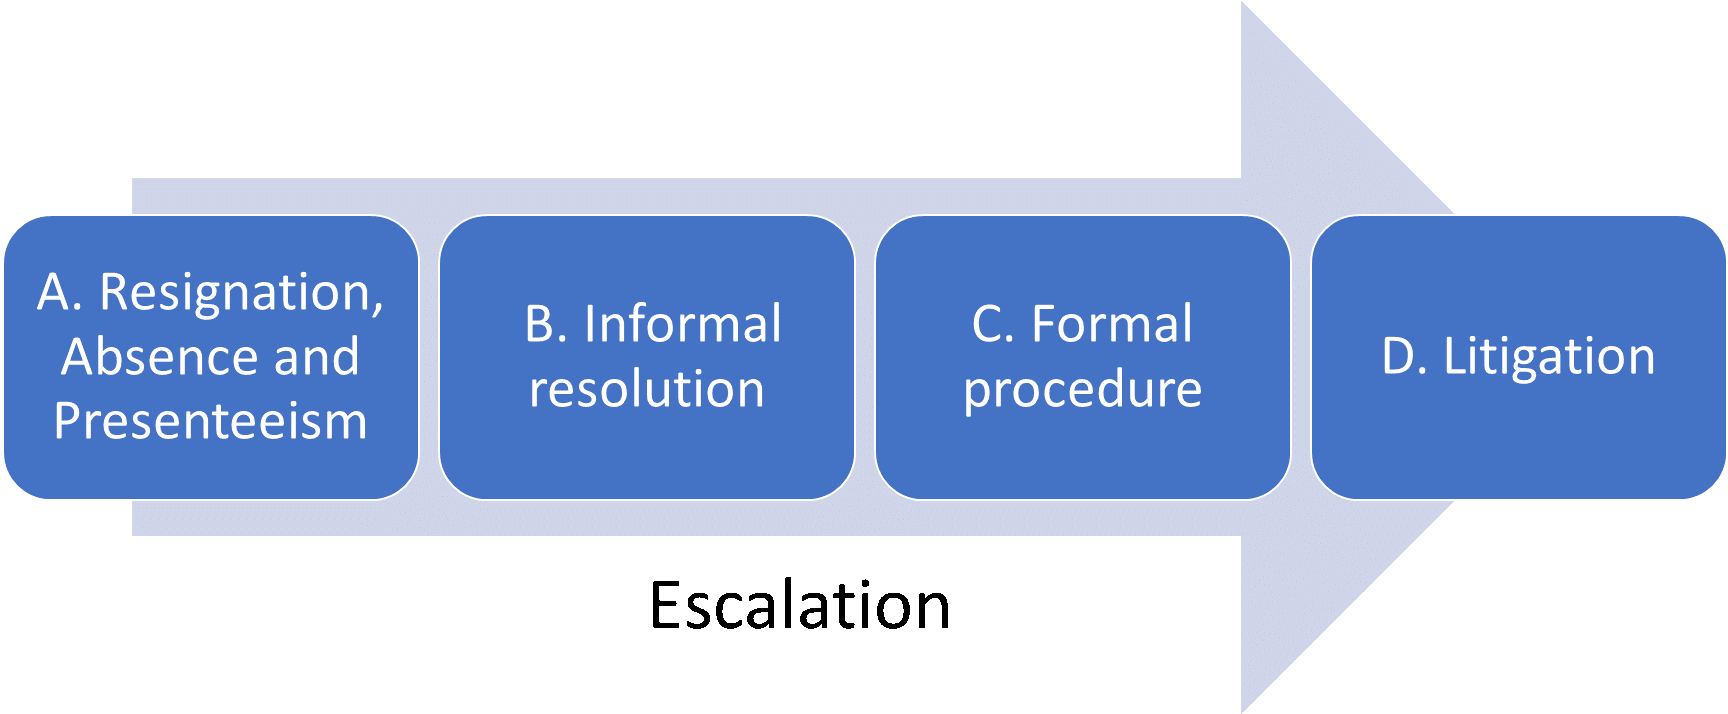 Diagram showing the 4 stages of conflict escalation.